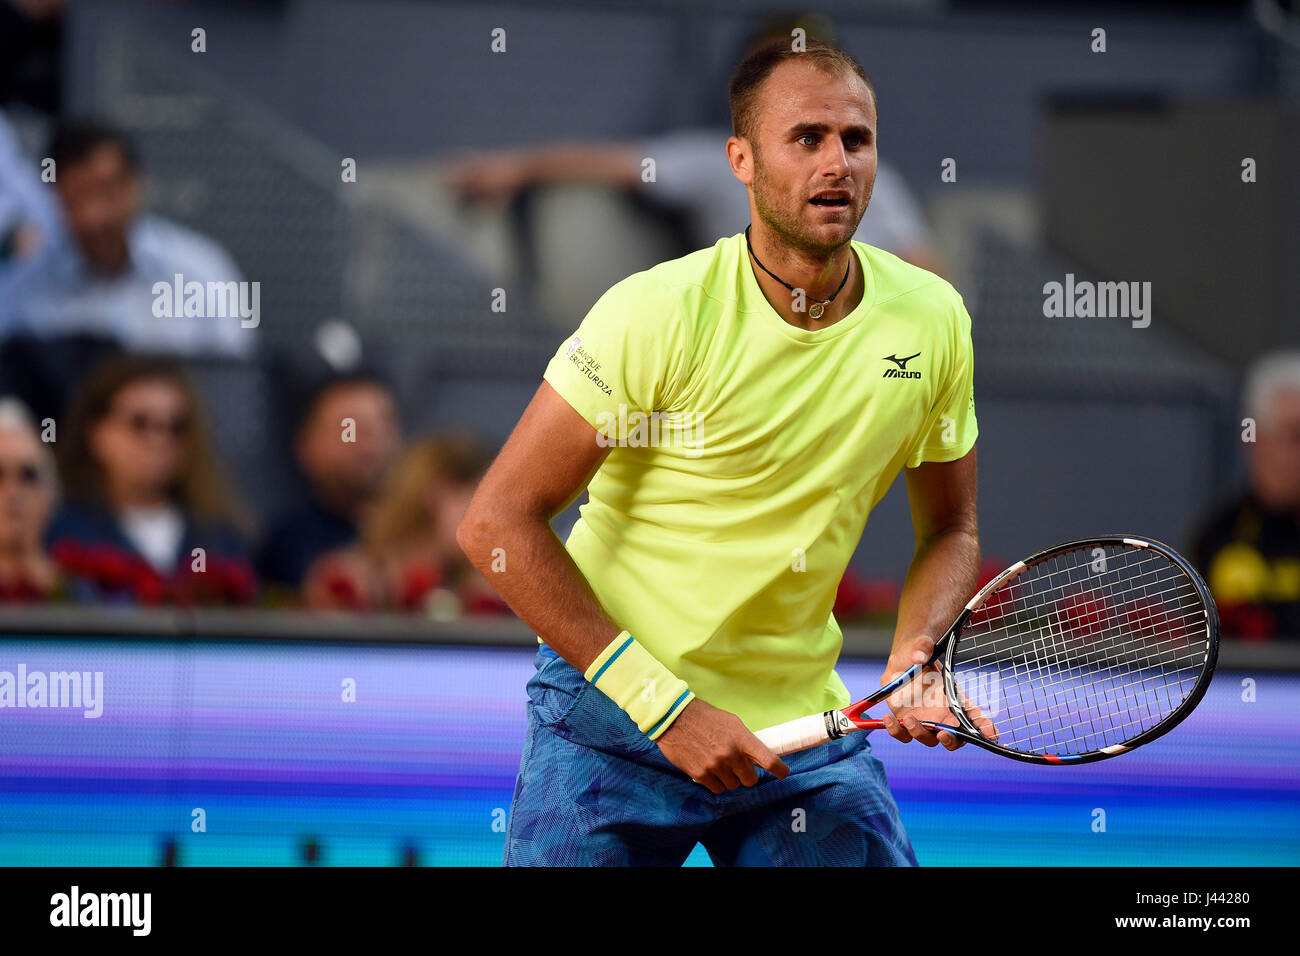 Madrid, Spain. 9th May, 2017. Tennis player Marius Copil during match Mutua  Madrid Open in Madrid